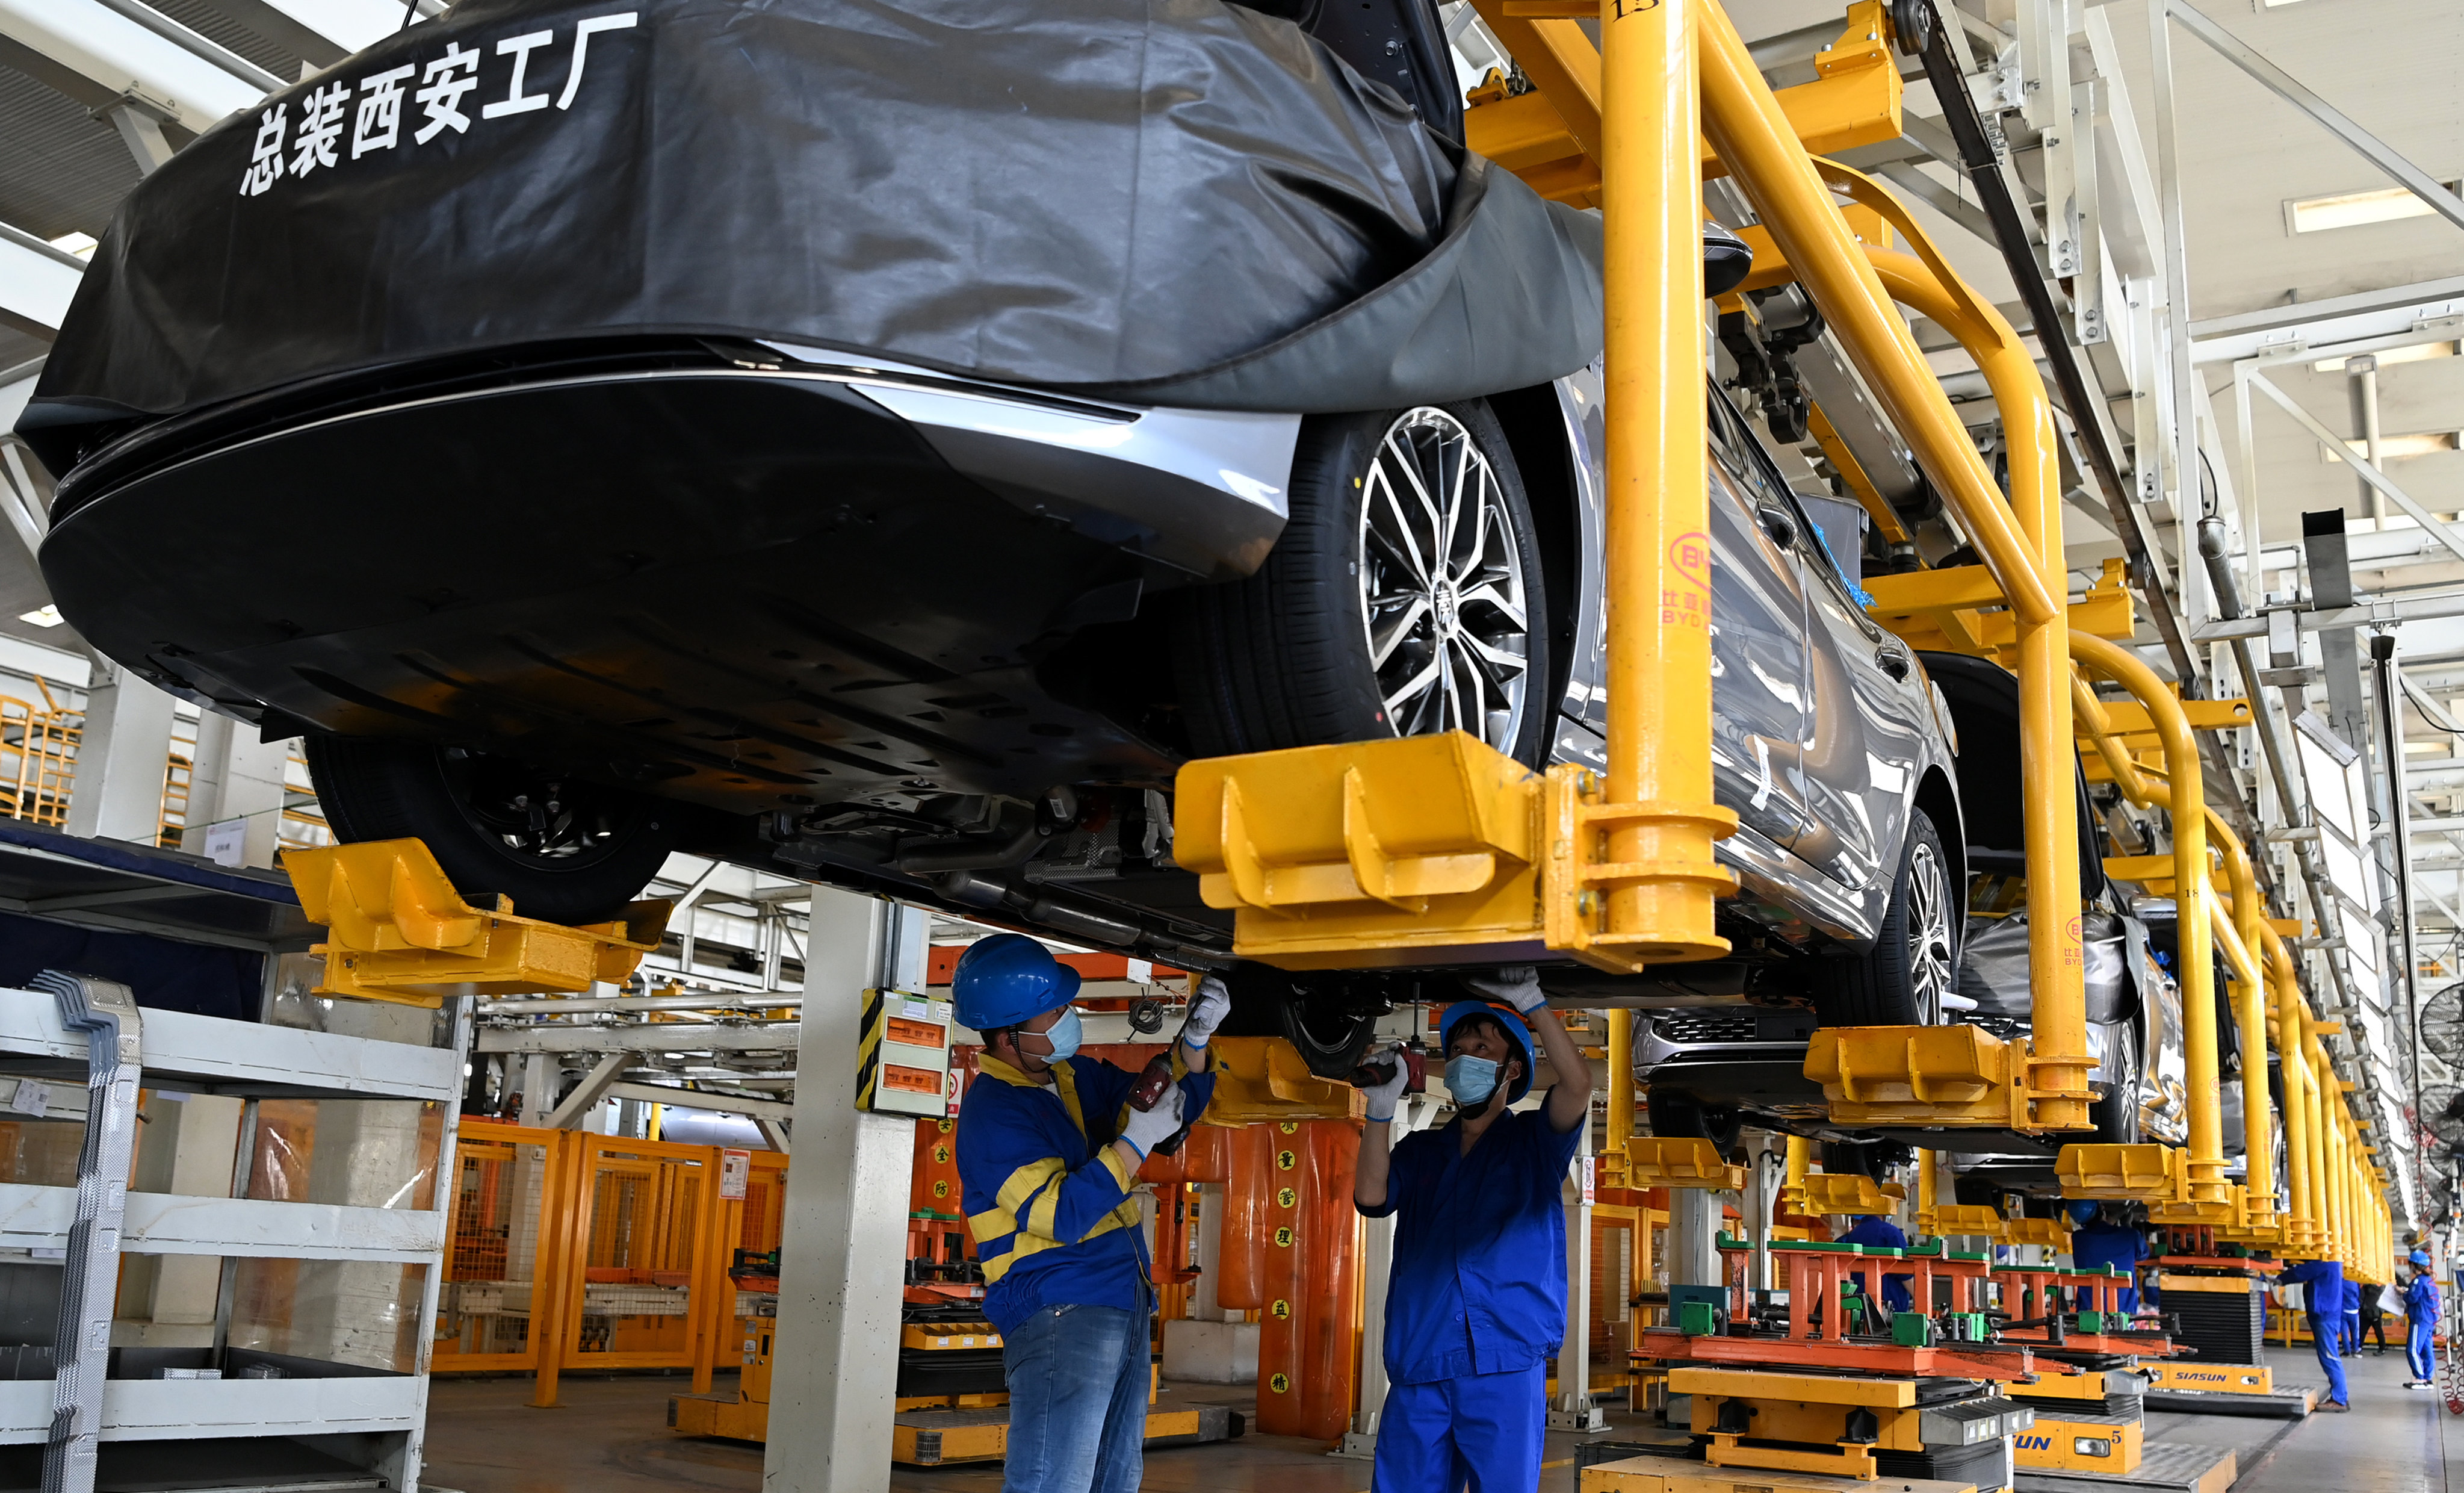 Workers assemble a BYD new energy vehicle at a factory in Xian, Shaanxi province, in April last year. Photo: Xinhua